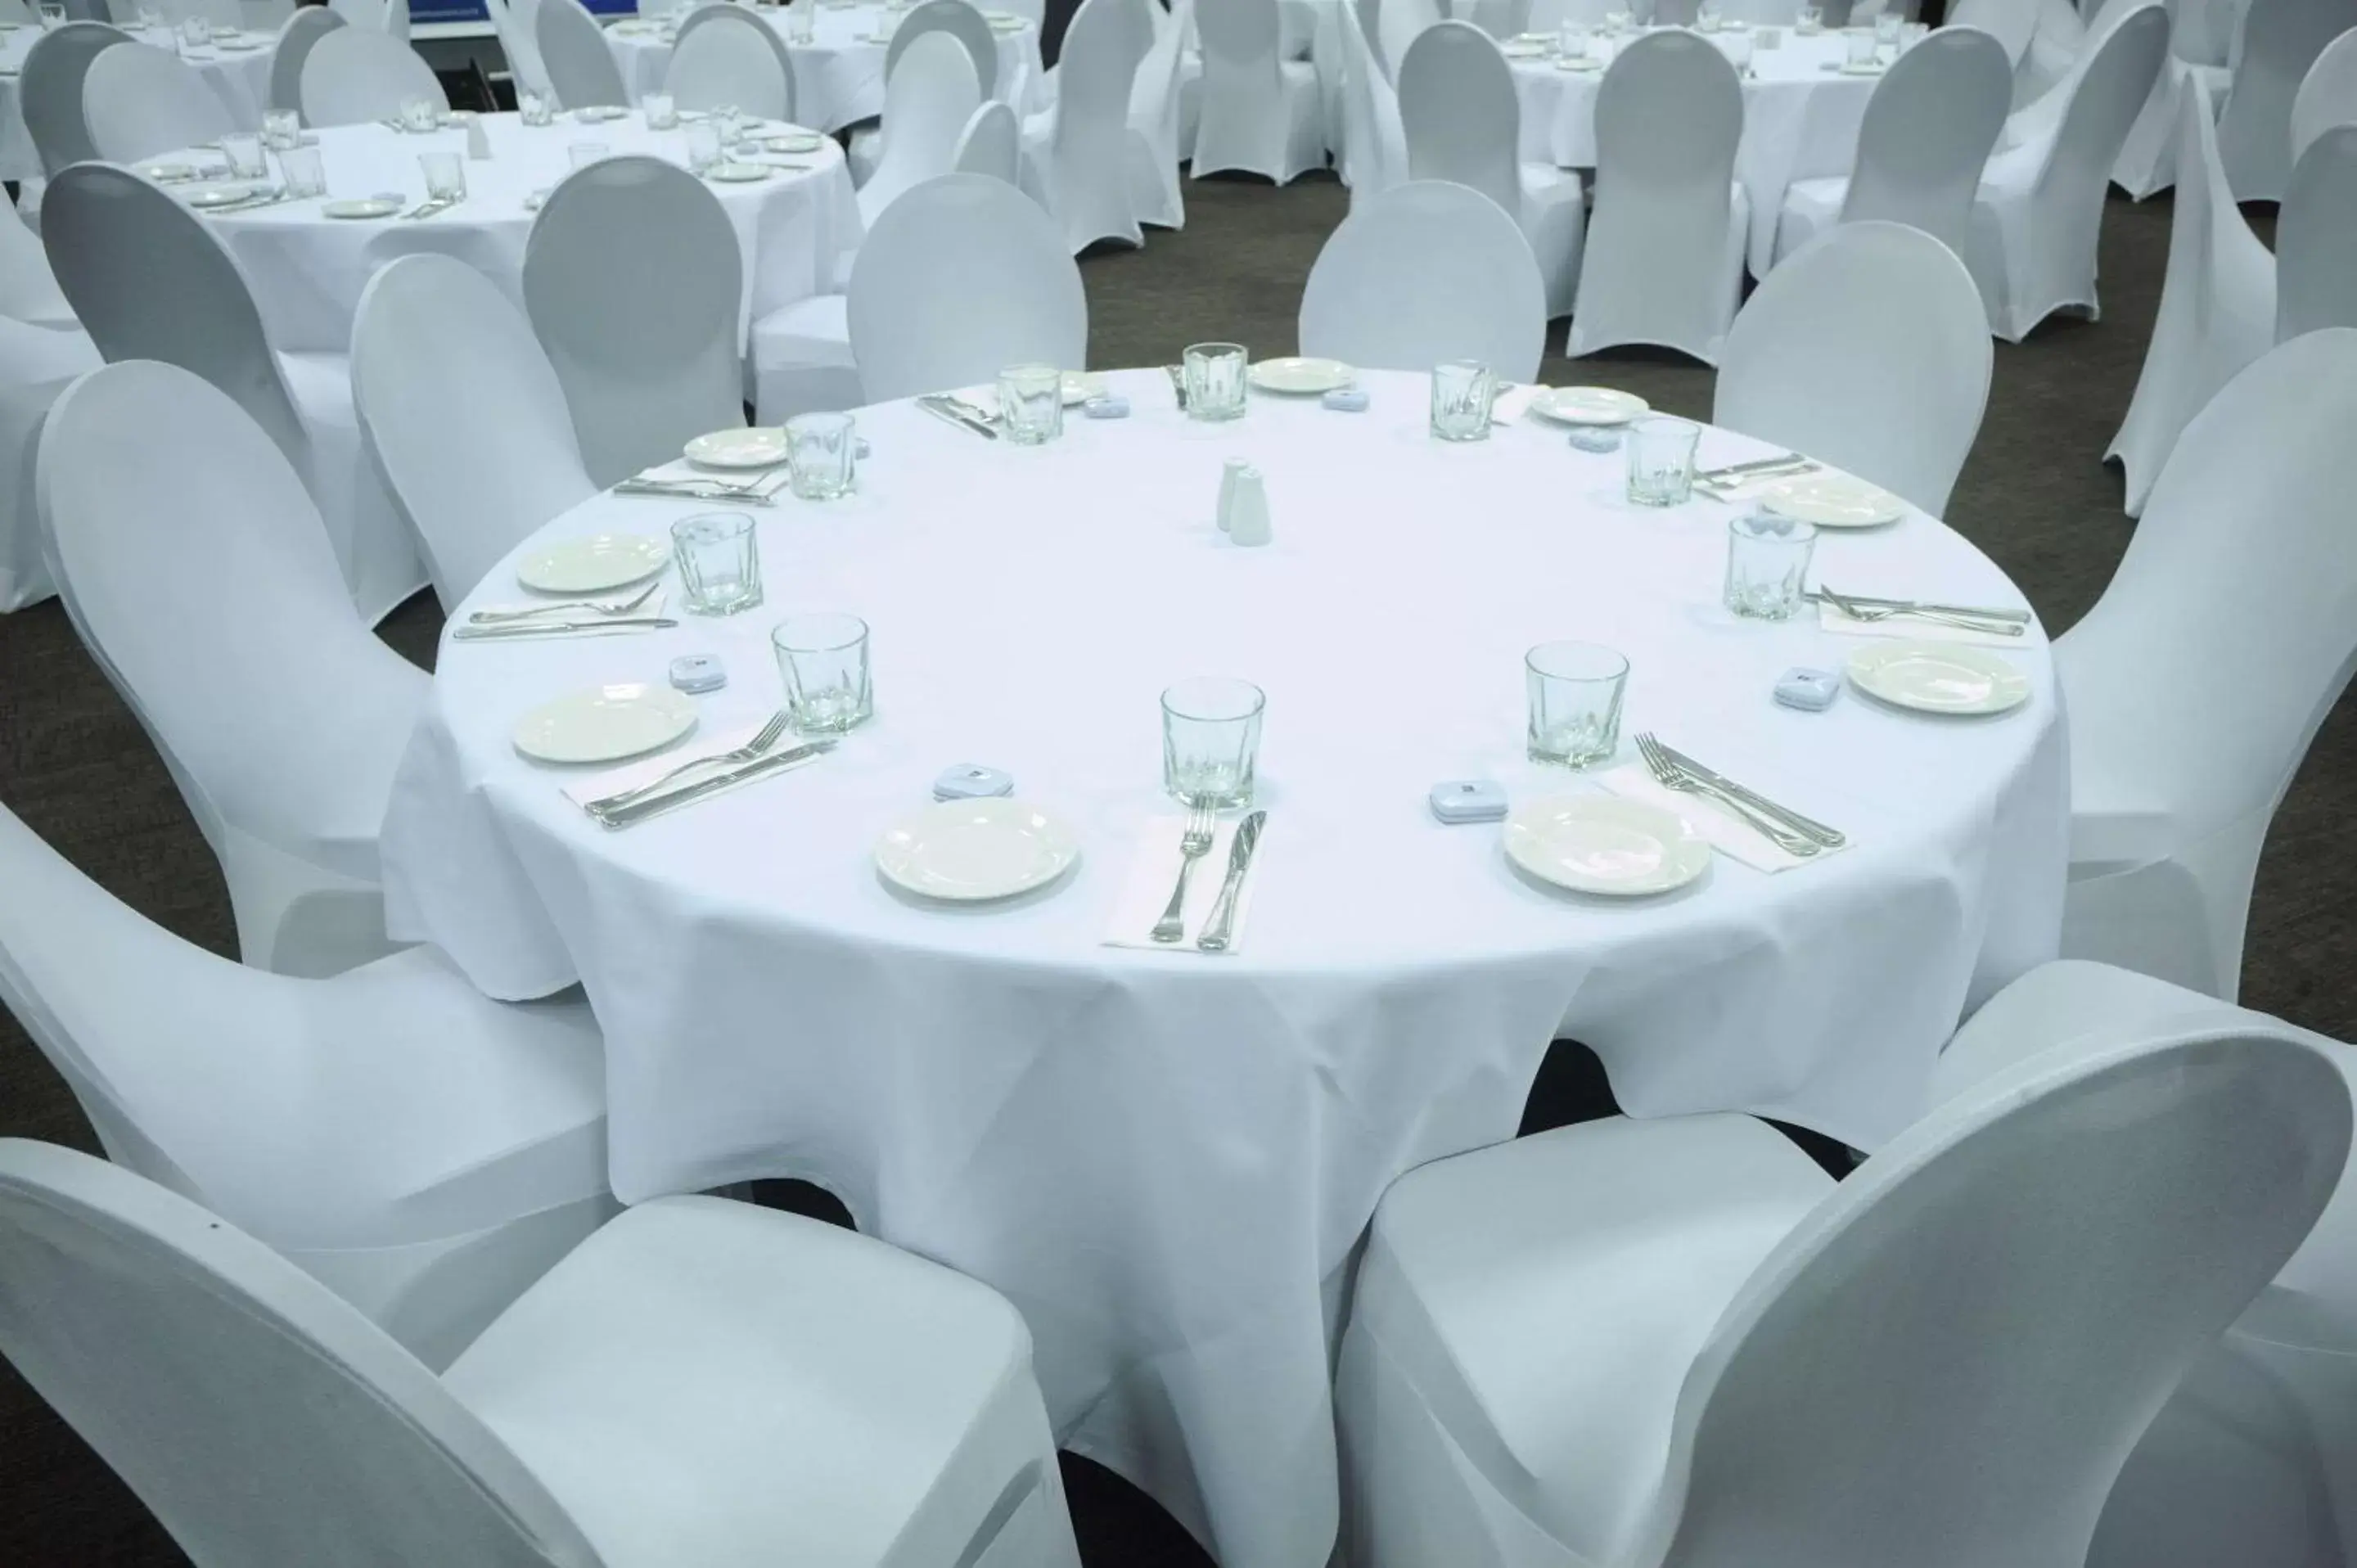 On site, Banquet Facilities in Quality Hotel Lincoln Green